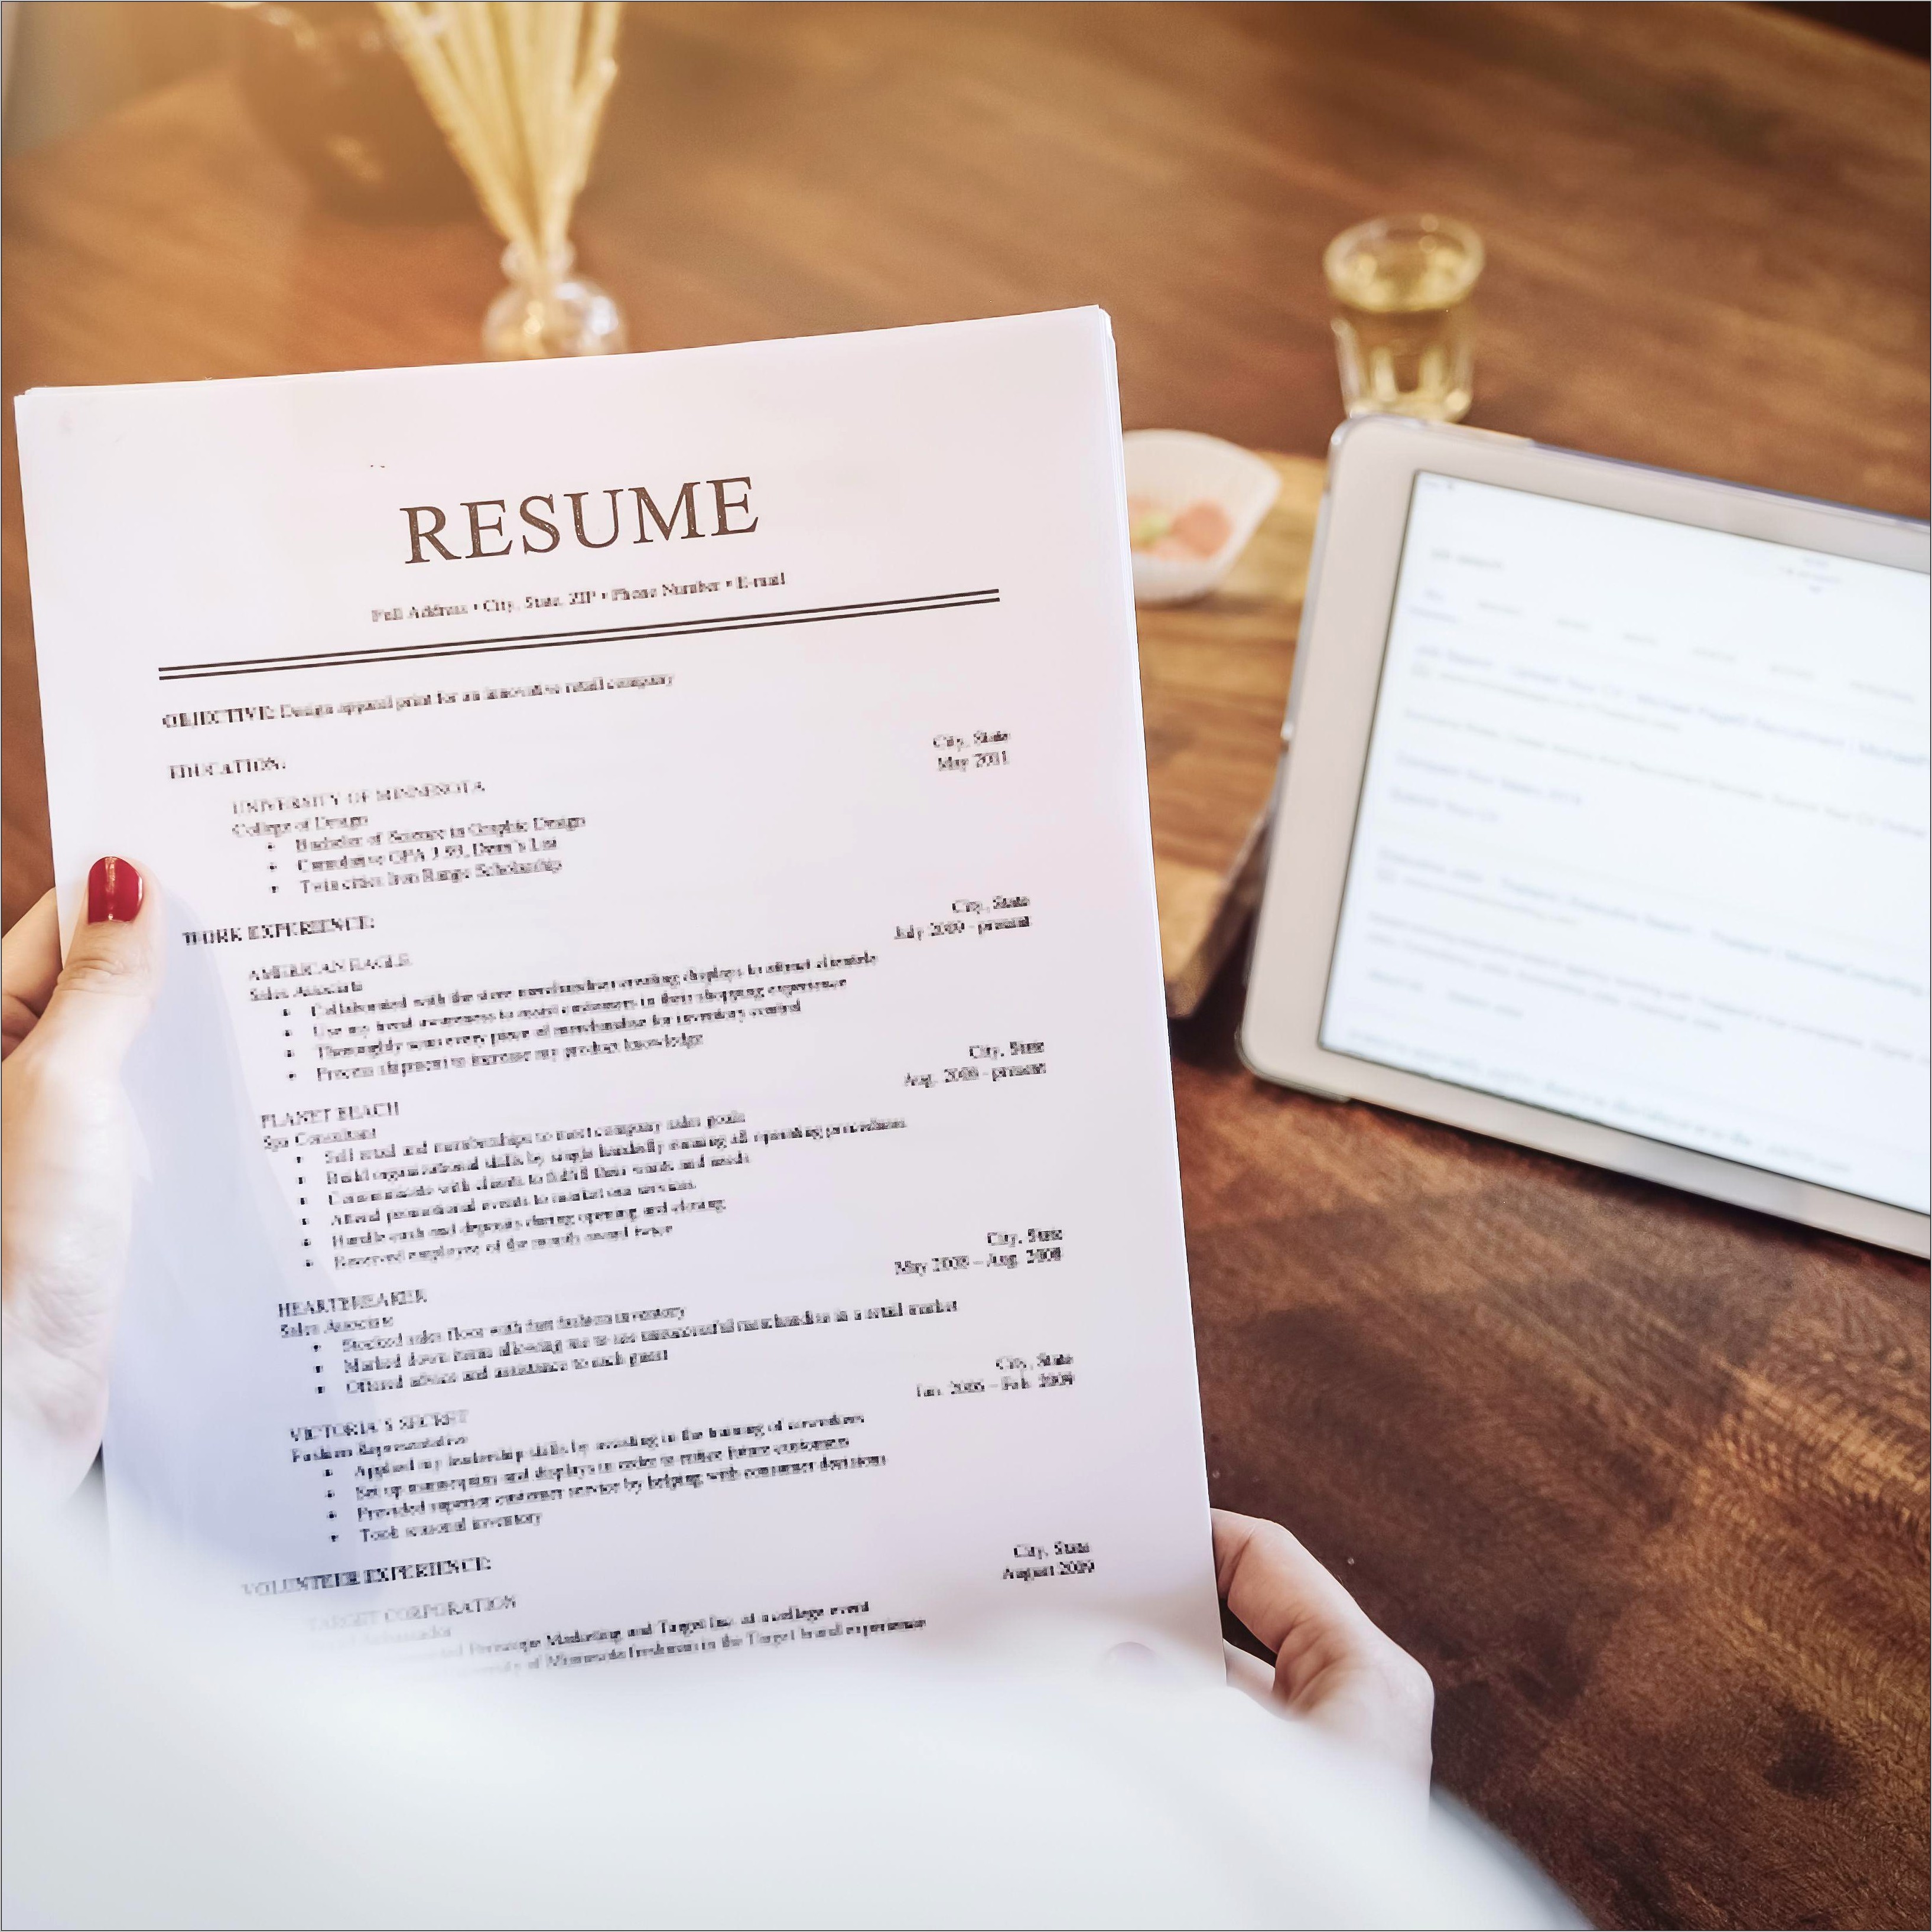 Program To Tailor A Resume To A Job